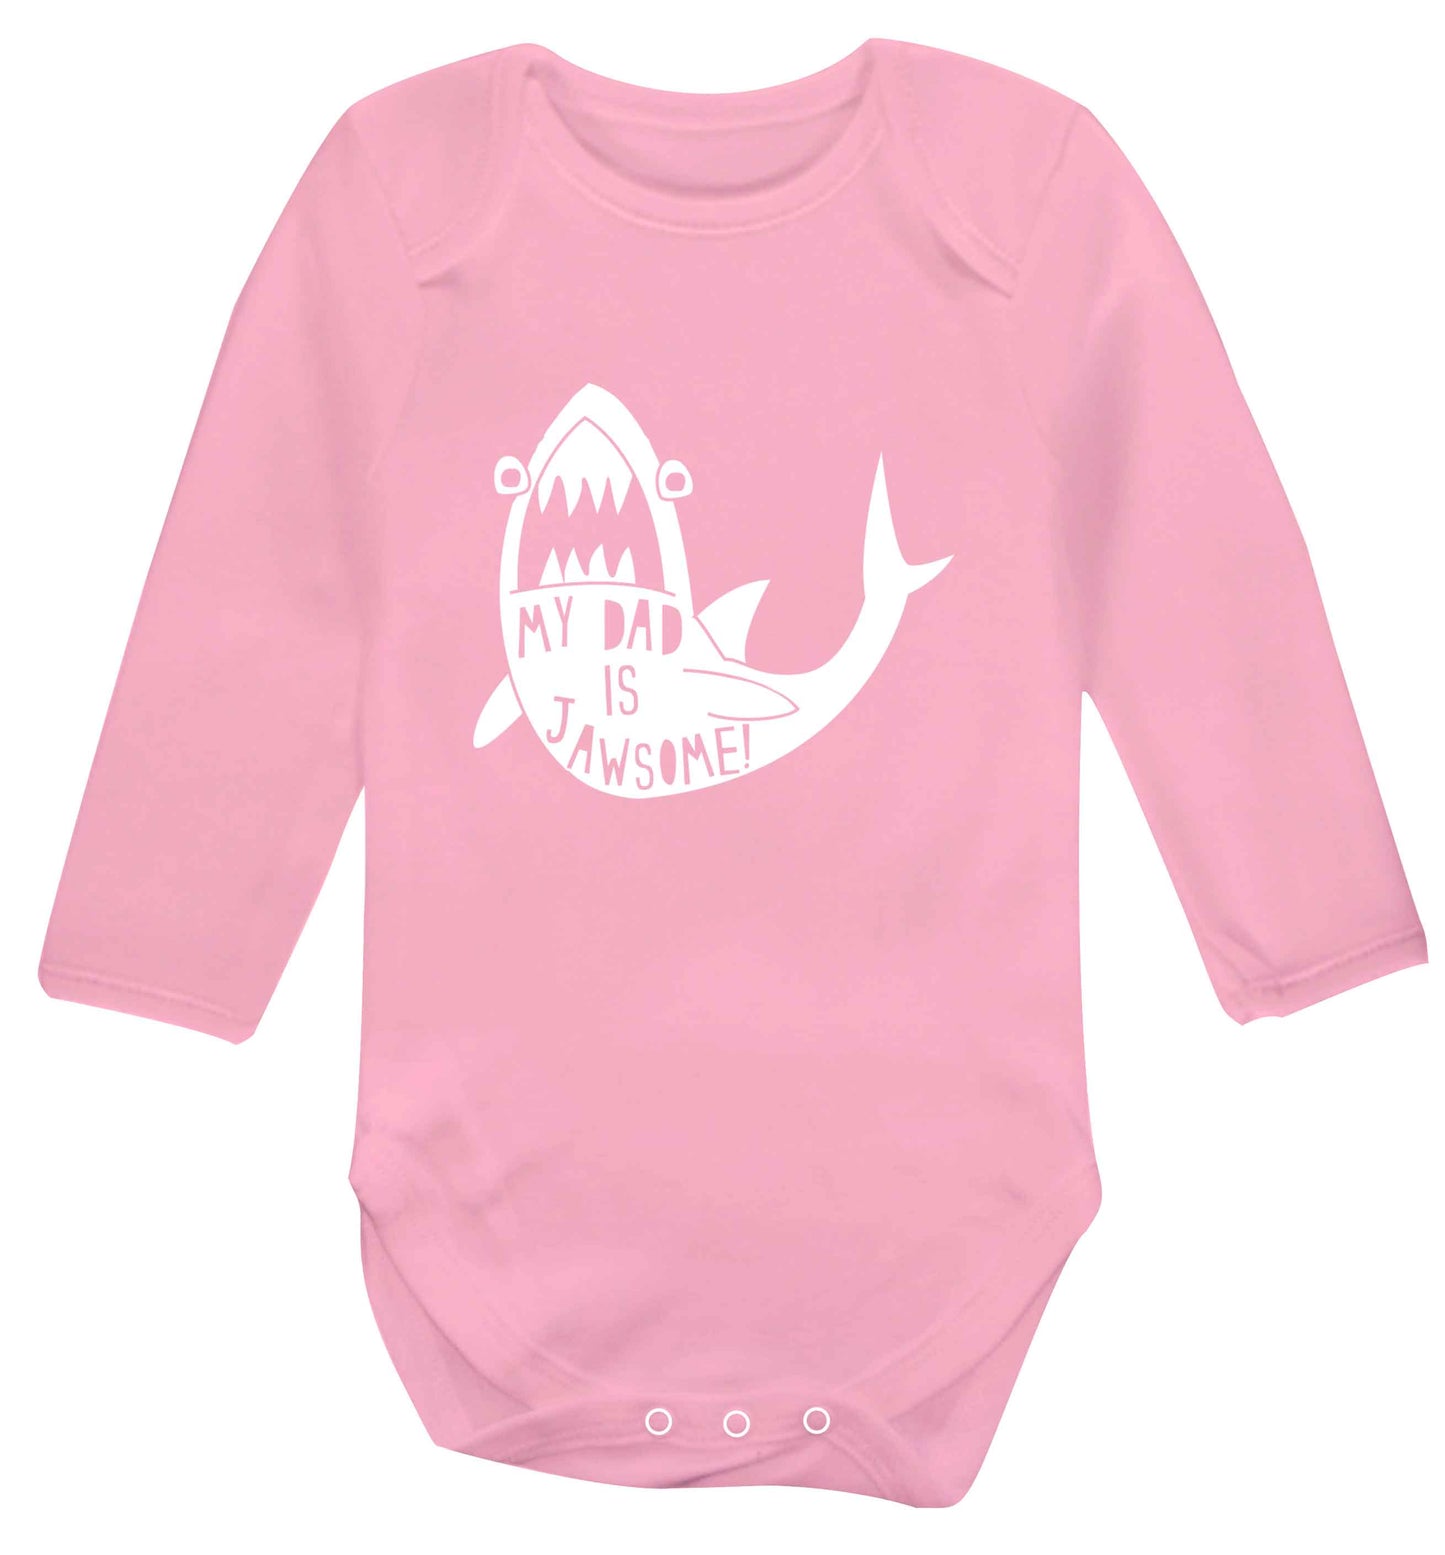 My Dad is jawsome baby vest long sleeved pale pink 6-12 months